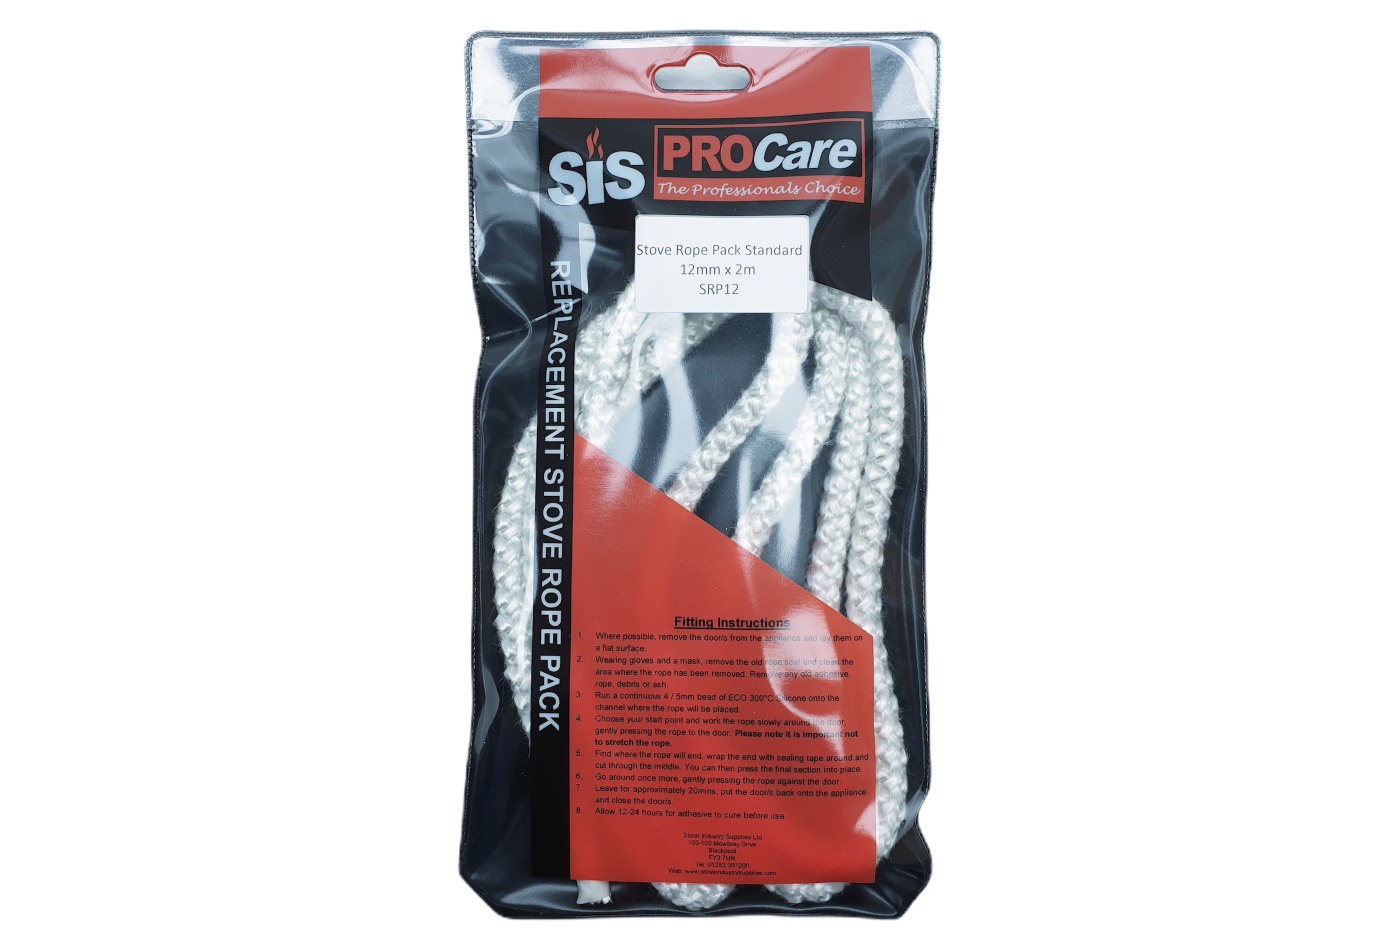 SiS Procare White 12 milimetre x 2 metre Standard Stove Rope Pack - product code SRP12